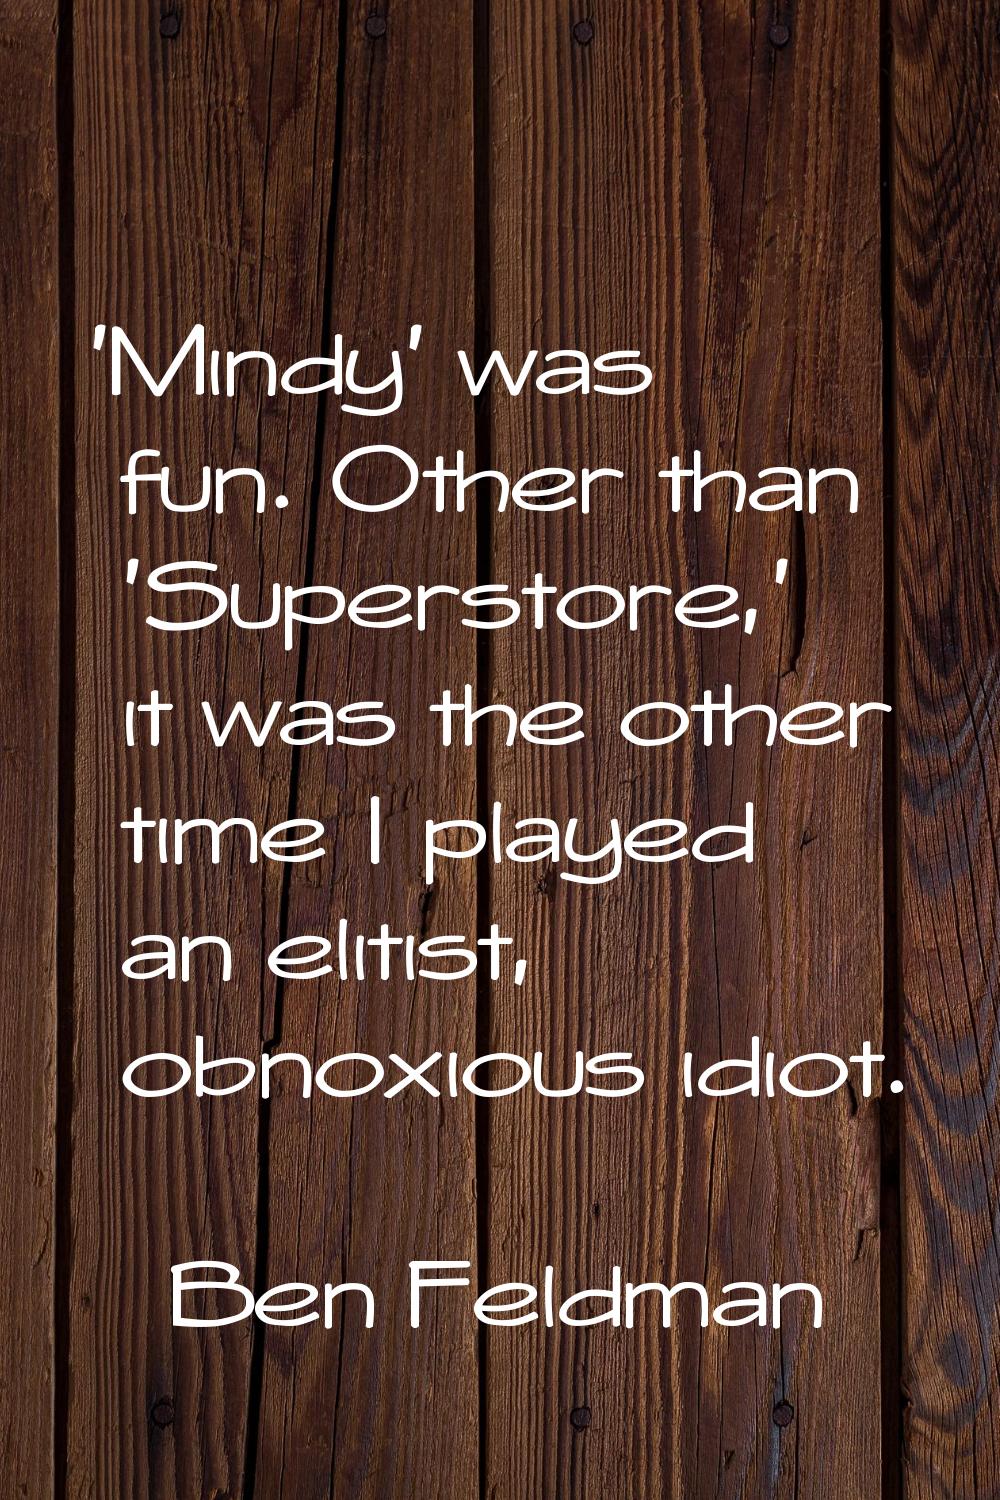 'Mindy' was fun. Other than 'Superstore,' it was the other time I played an elitist, obnoxious idio